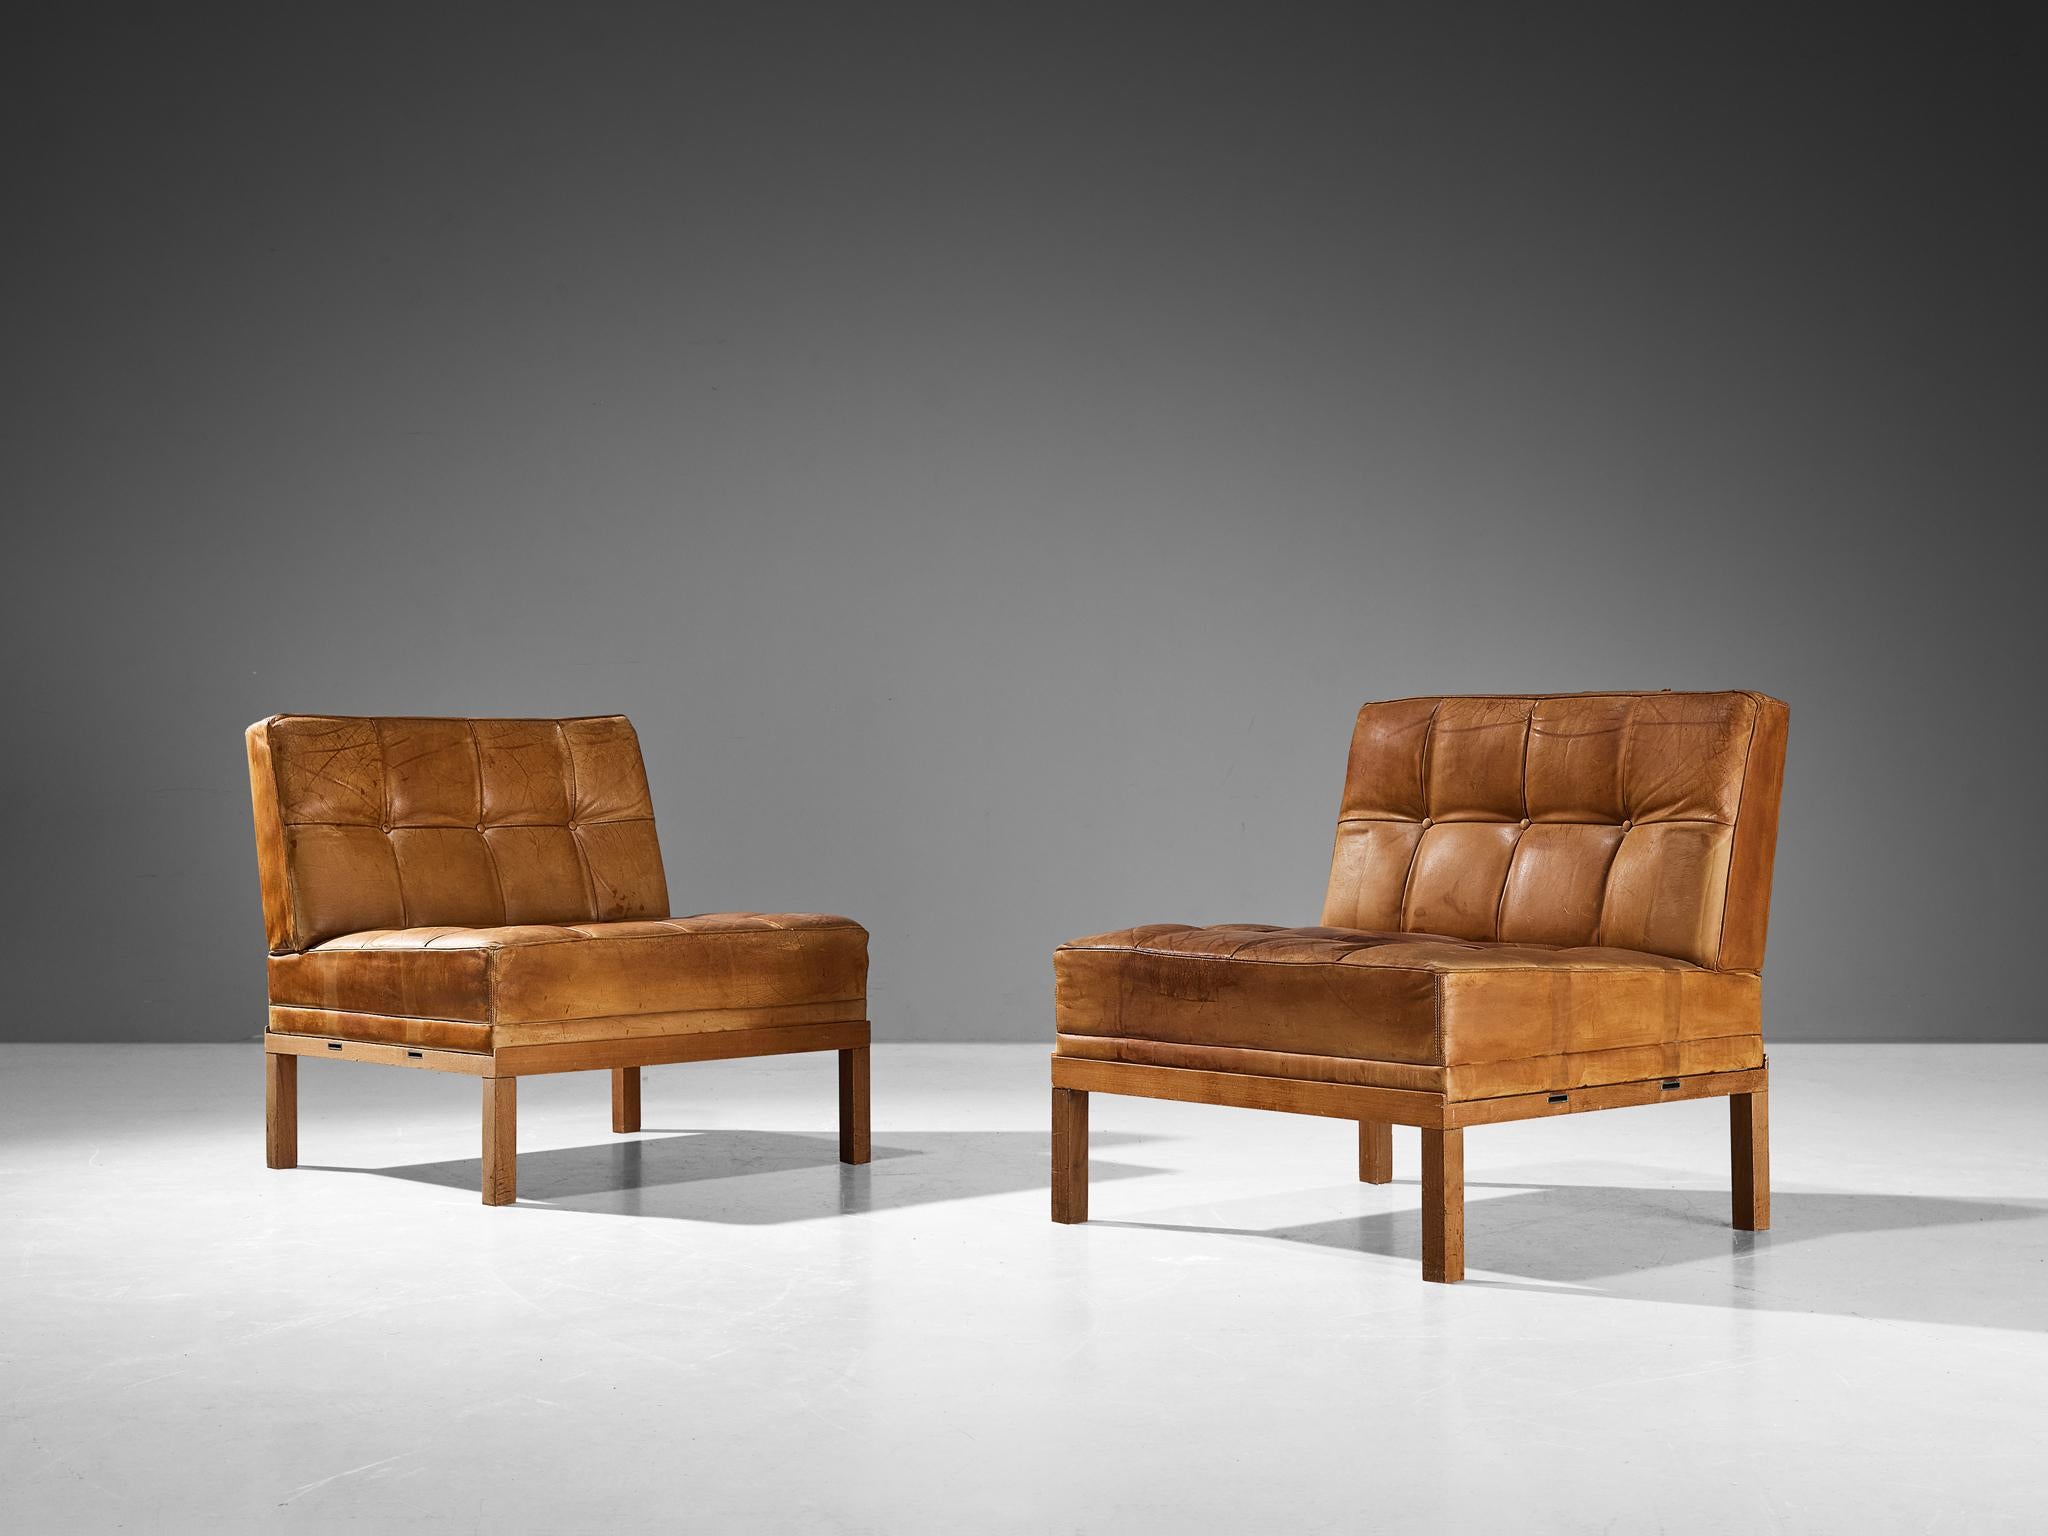 Johannes Spalt for Wittmann, lounge chairs, leather, oak, Austria, 1960s 

This beautiful pair of lounge chairs is designed by architect Johannes Spalt, is typical for mid-century modern design from Austria of the 1960s. The tufted cognac leather